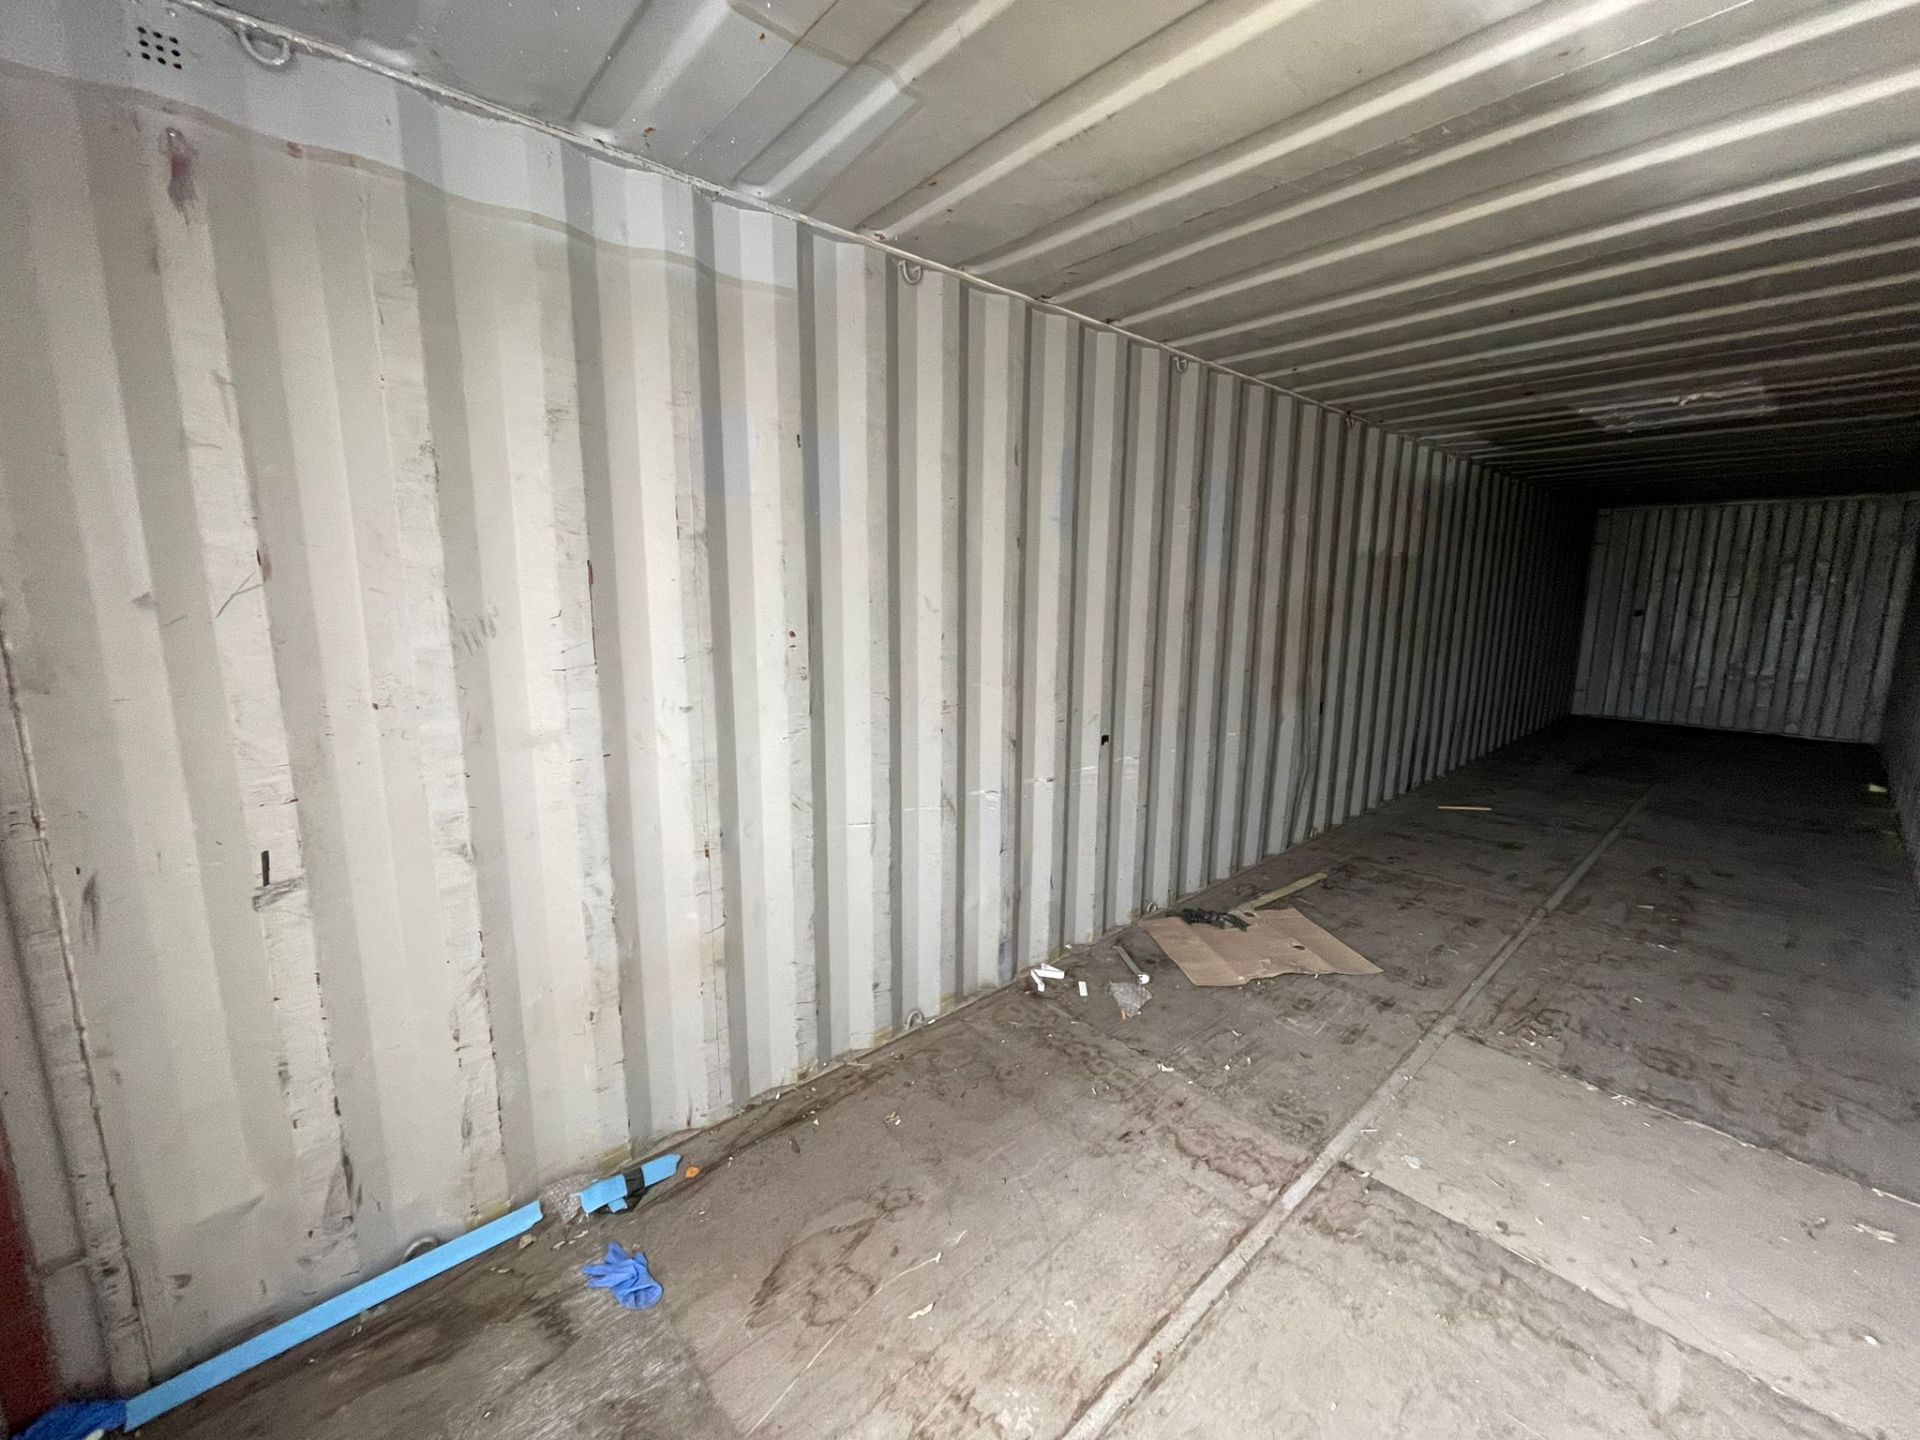 Shipping Container - ref IEAU4208486 - NO RESERVE (40’ GP - Standard) - Image 3 of 4